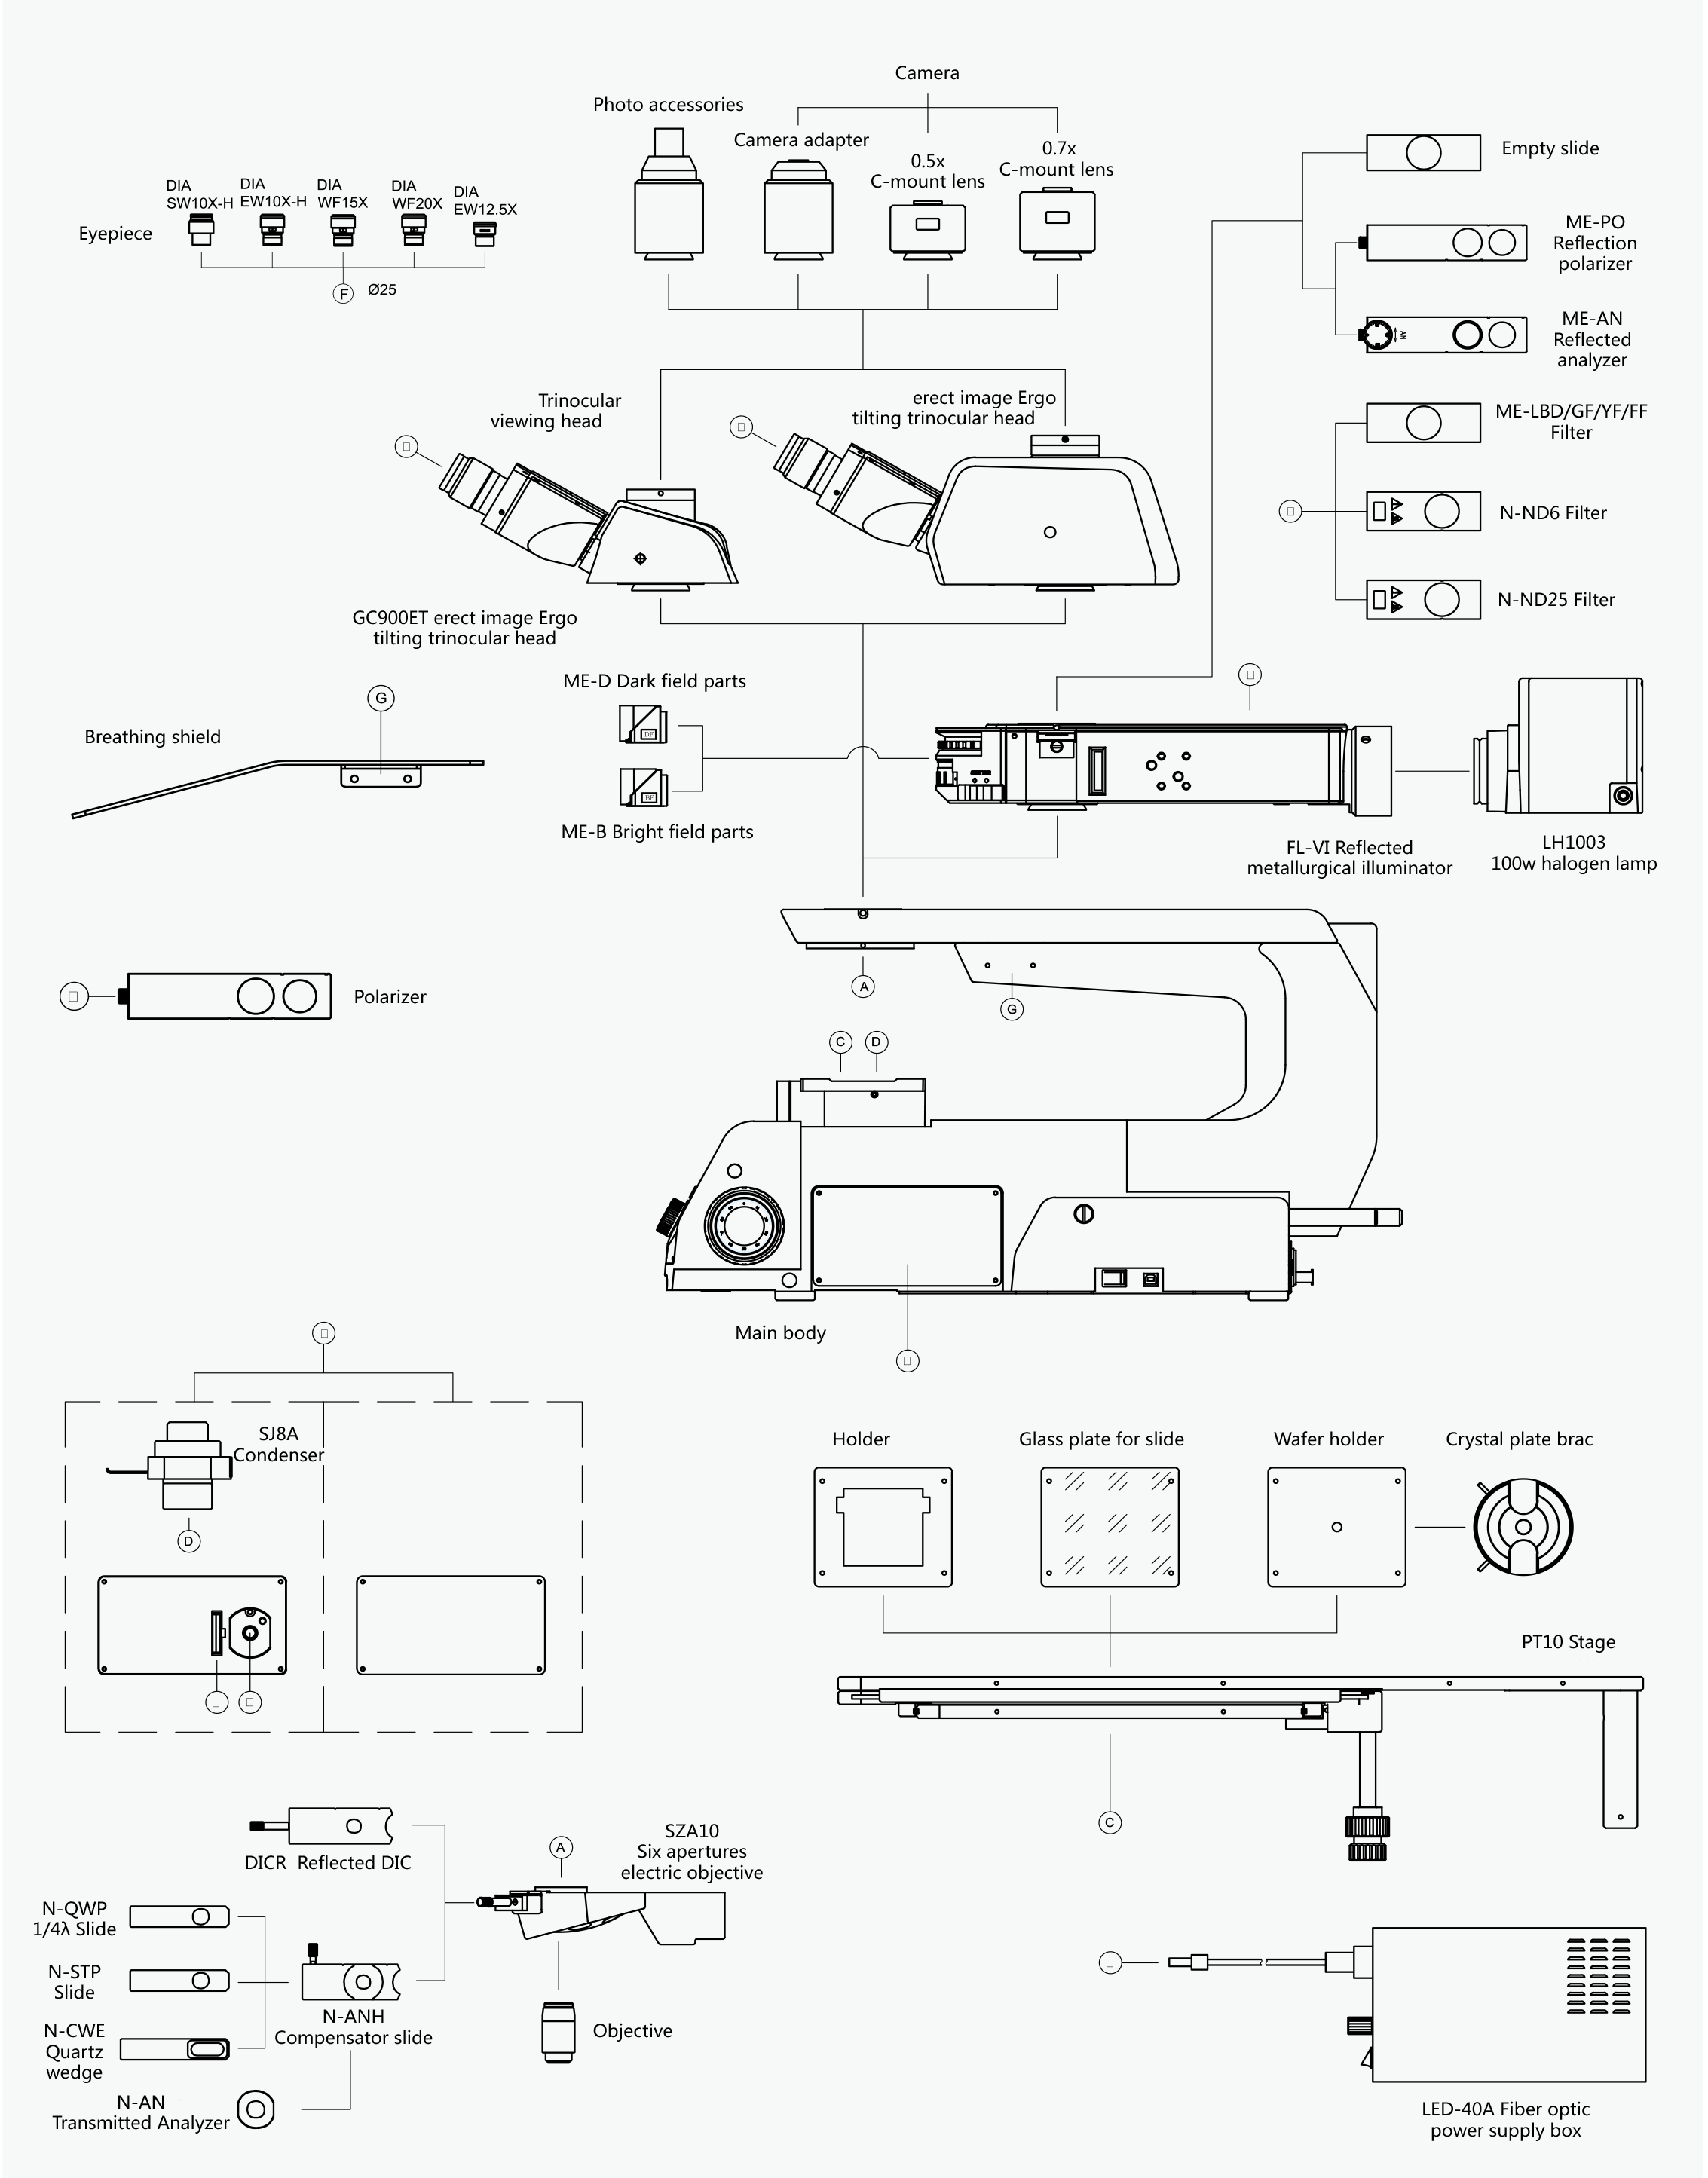 BS-4020 System Diagram